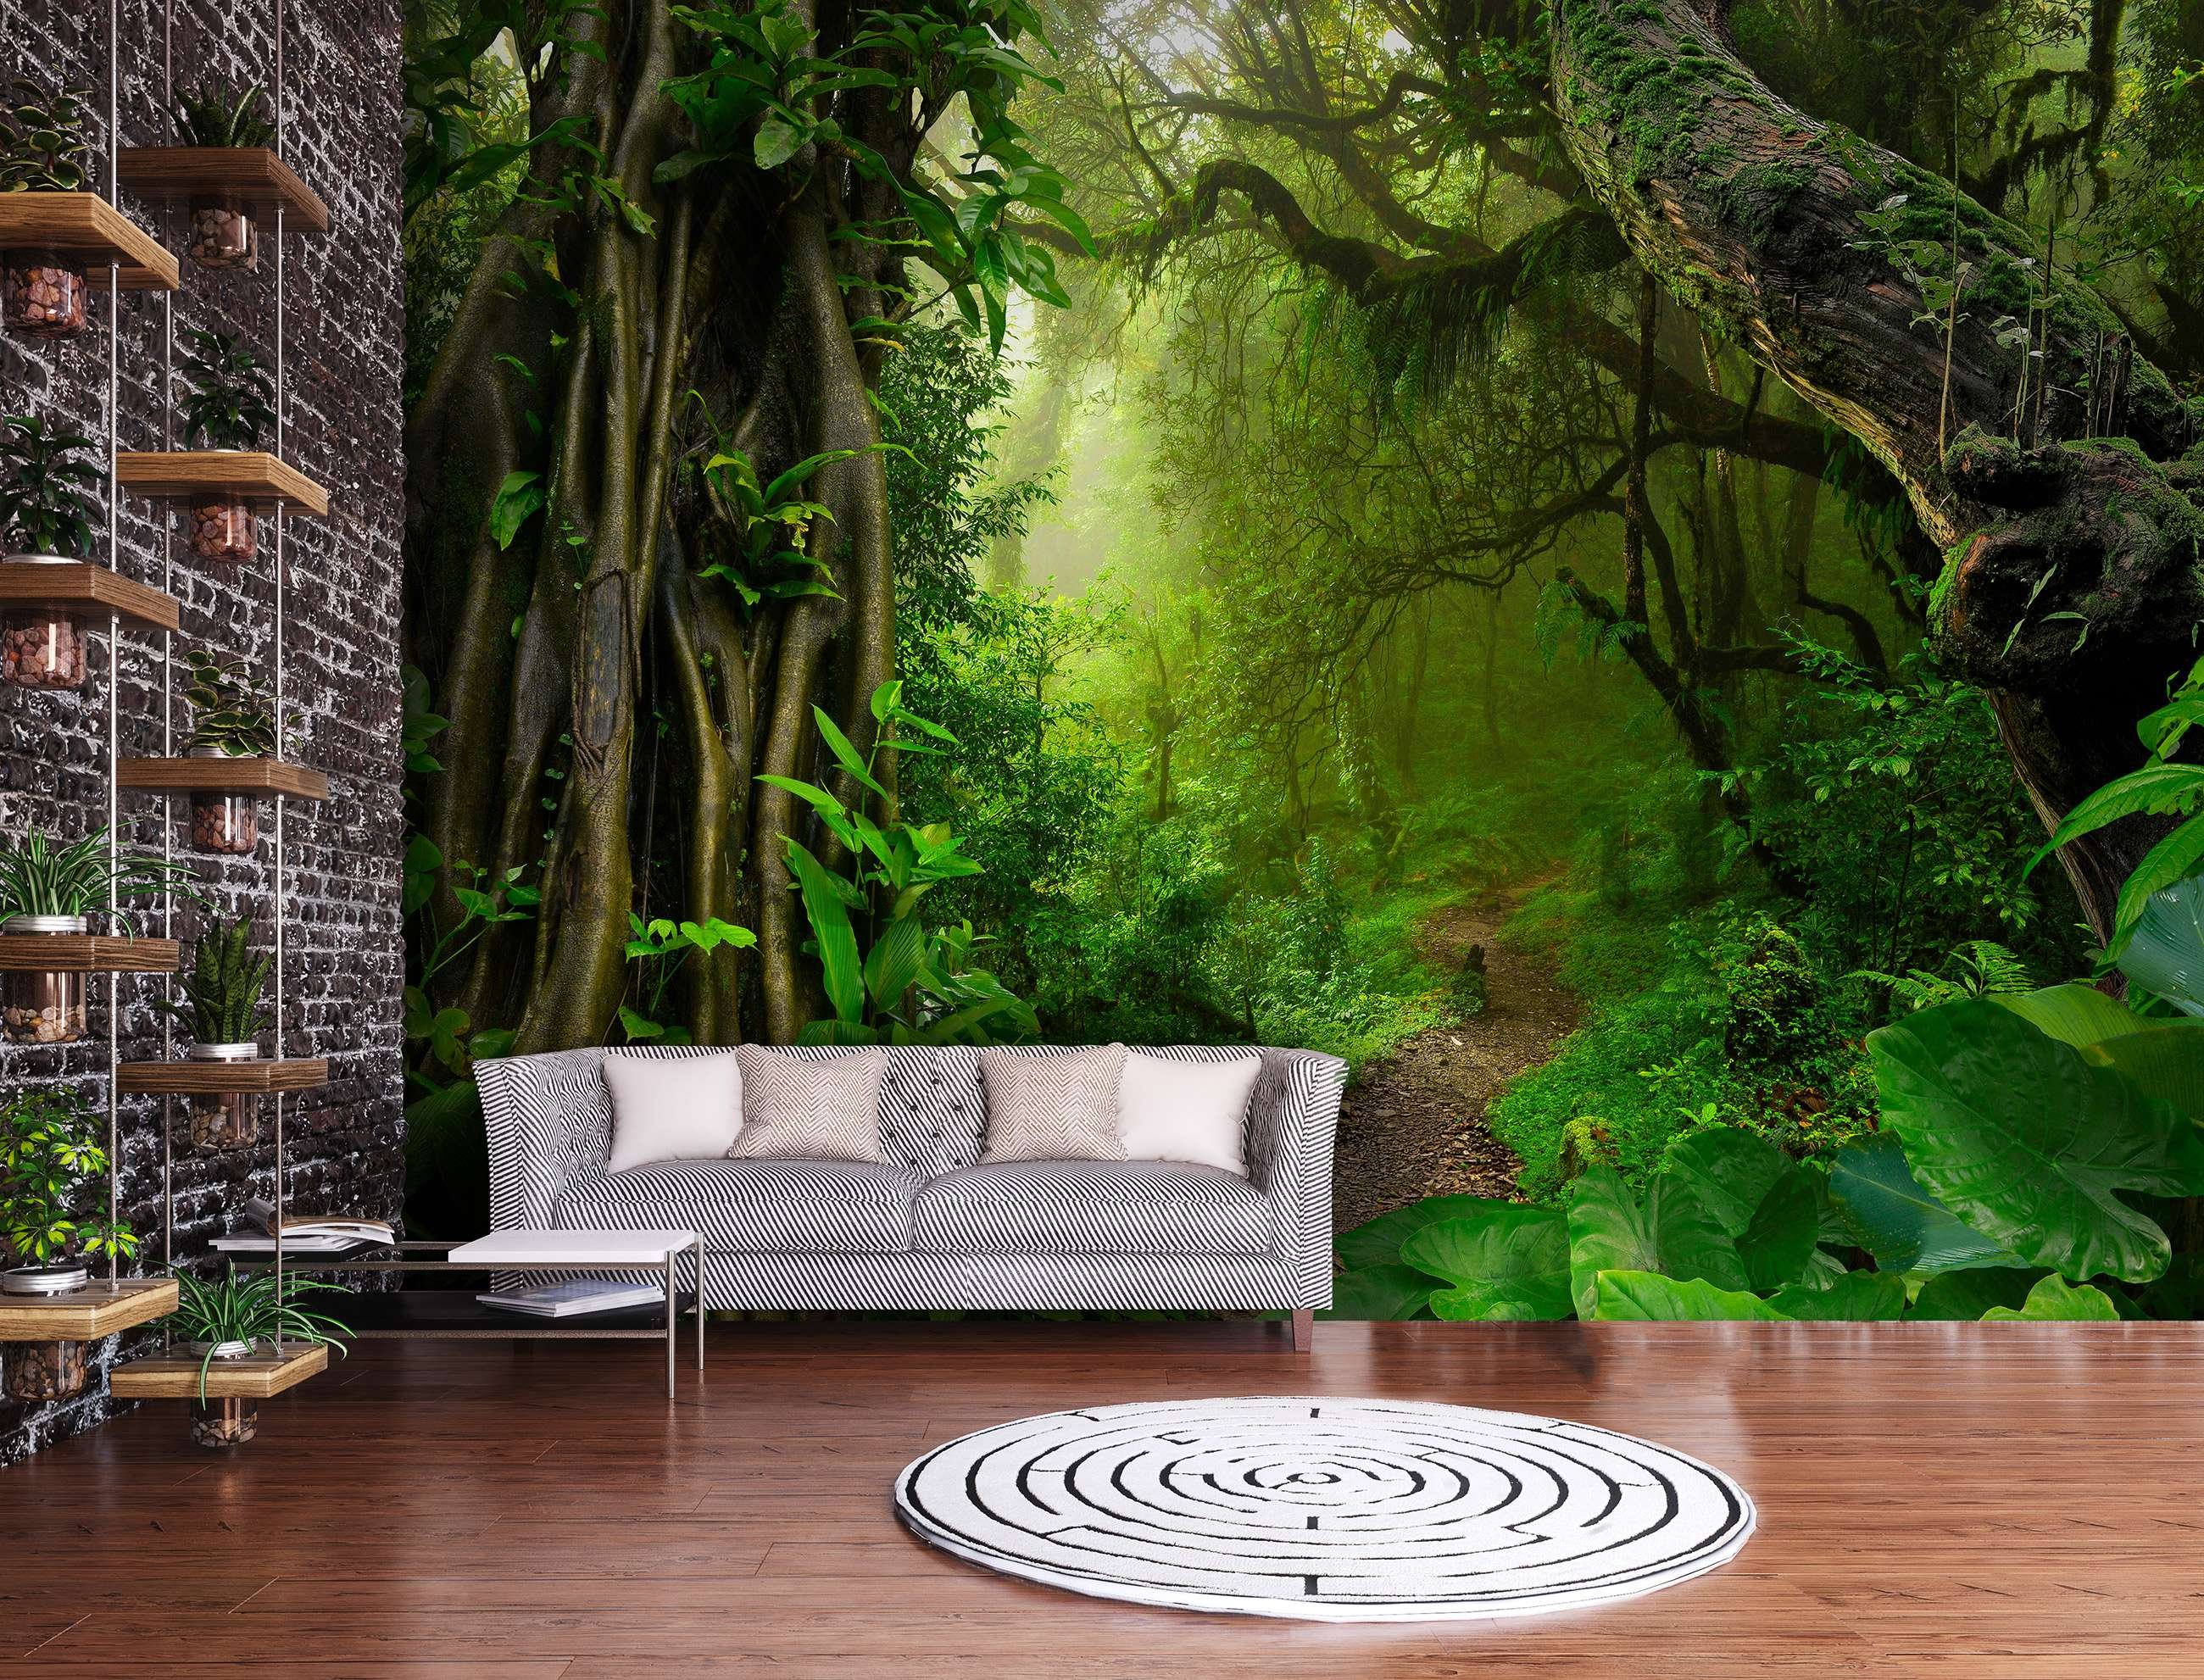 Wall mural vlies: Path in the forest - 152,5x104 cm